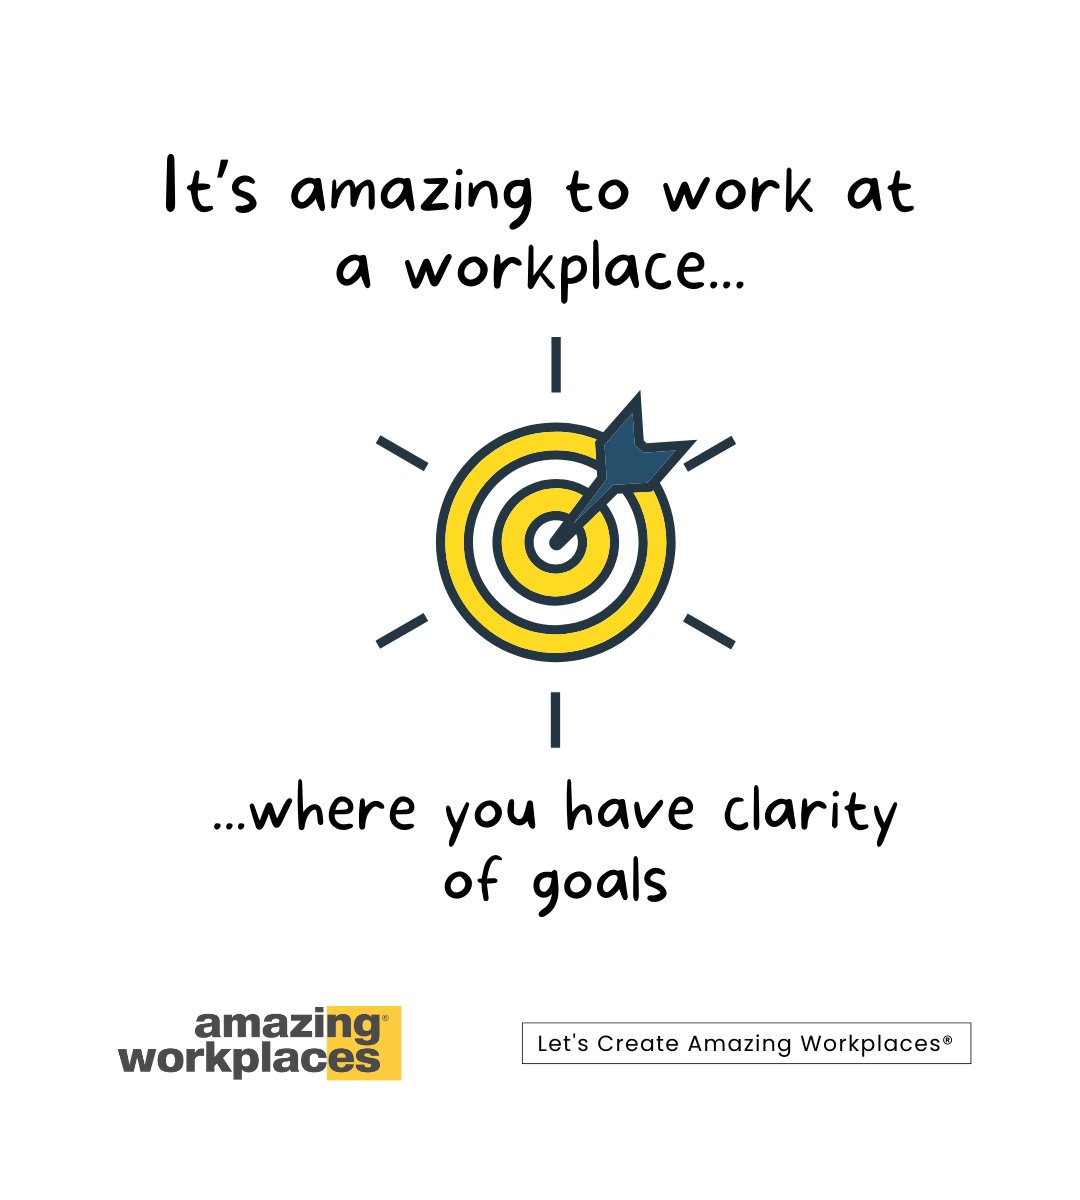 Clarity of goals provides a sense of purpose and direction, allowing individuals to align their efforts with the organization's mission.

#amazingworkplaces #letscreateamazingworkplaces #goals #clarity #pride #purpose #leadership #culture